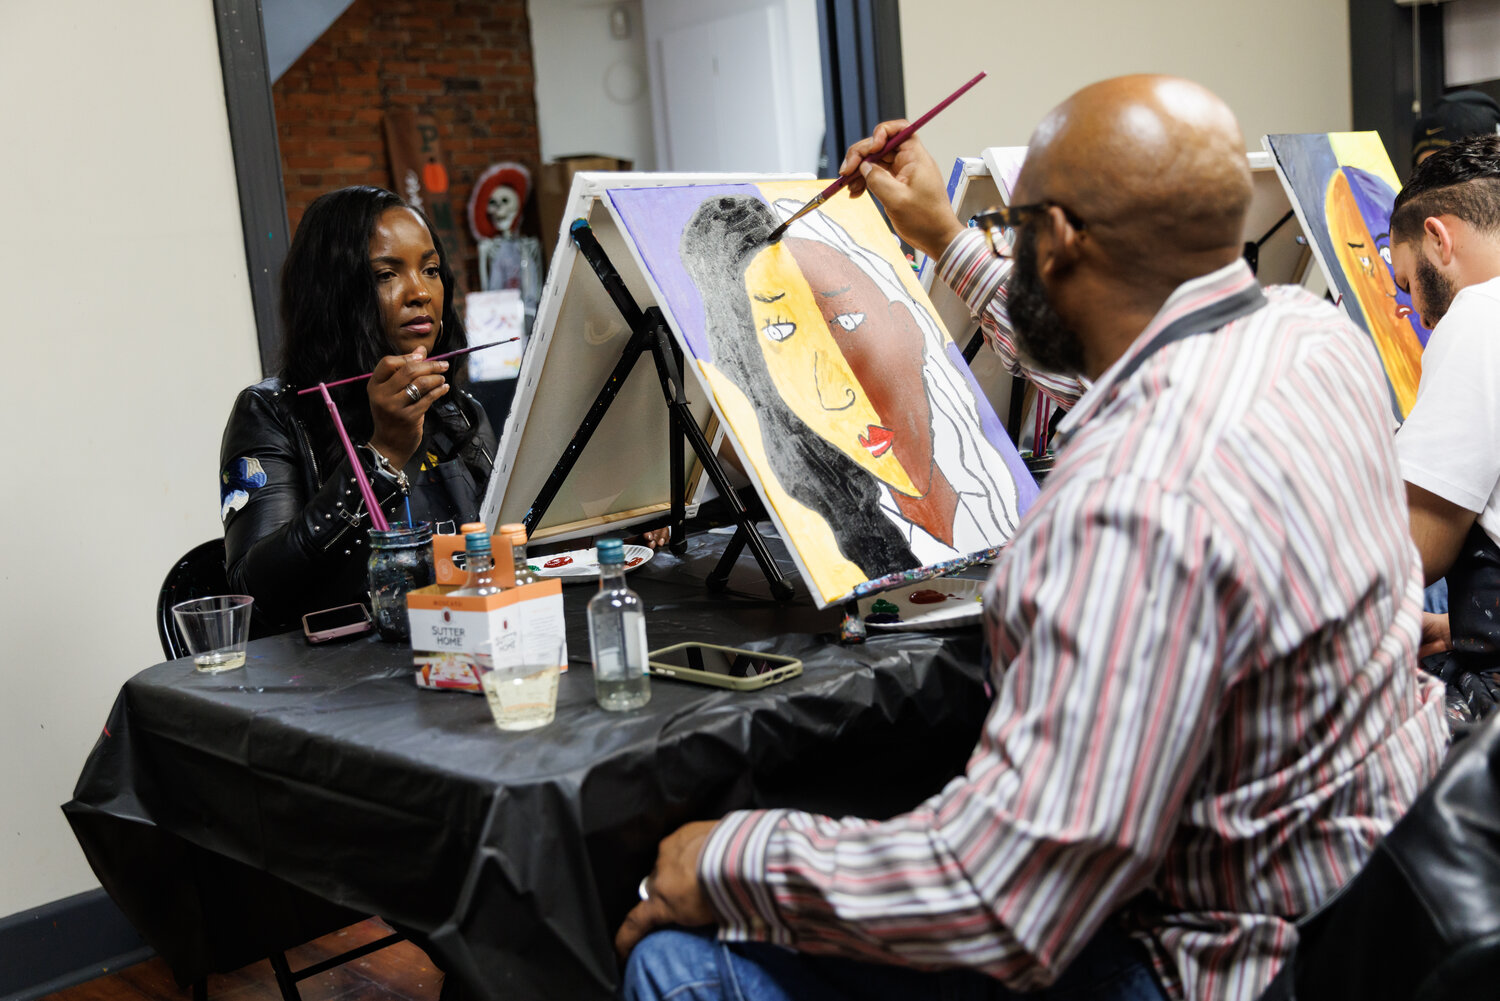 Ron and Tameeka Broadway have been married for 10 years and chose this evening to paint portraits of one another as an alternative to a dinner date.